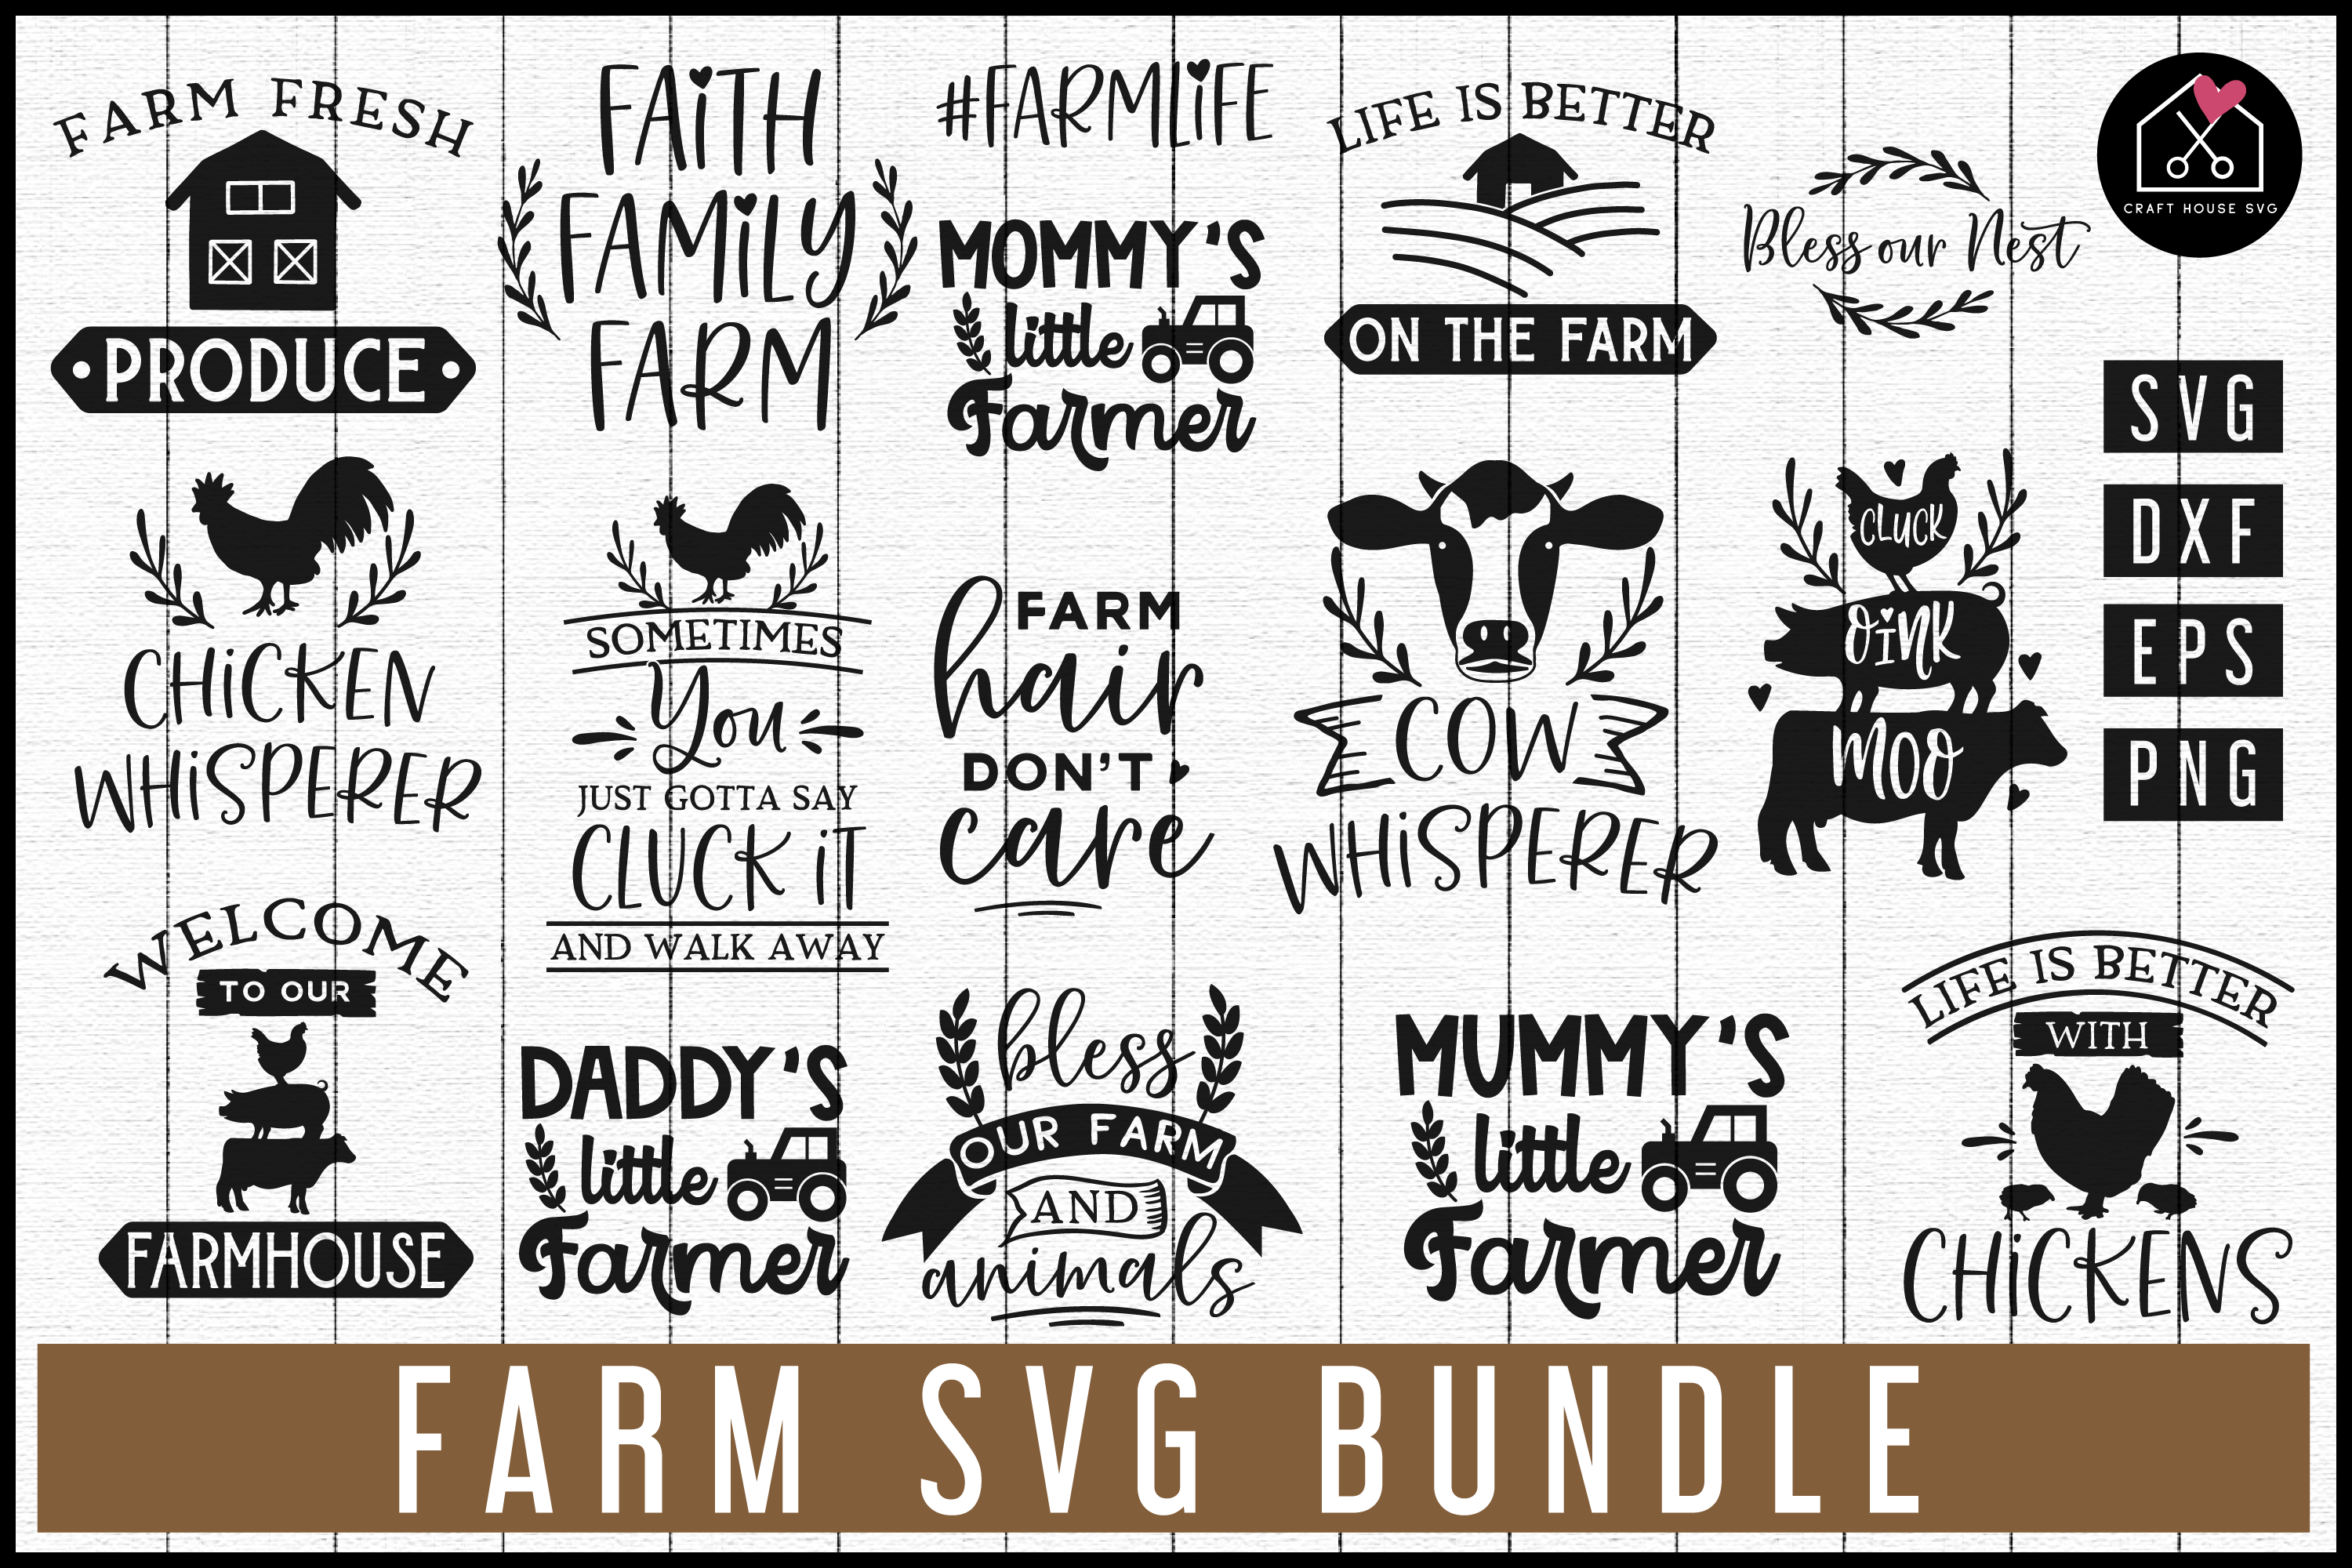 Farm SVG Bundle | MB68 Craft House SVG - SVG files for Cricut and Silhouette